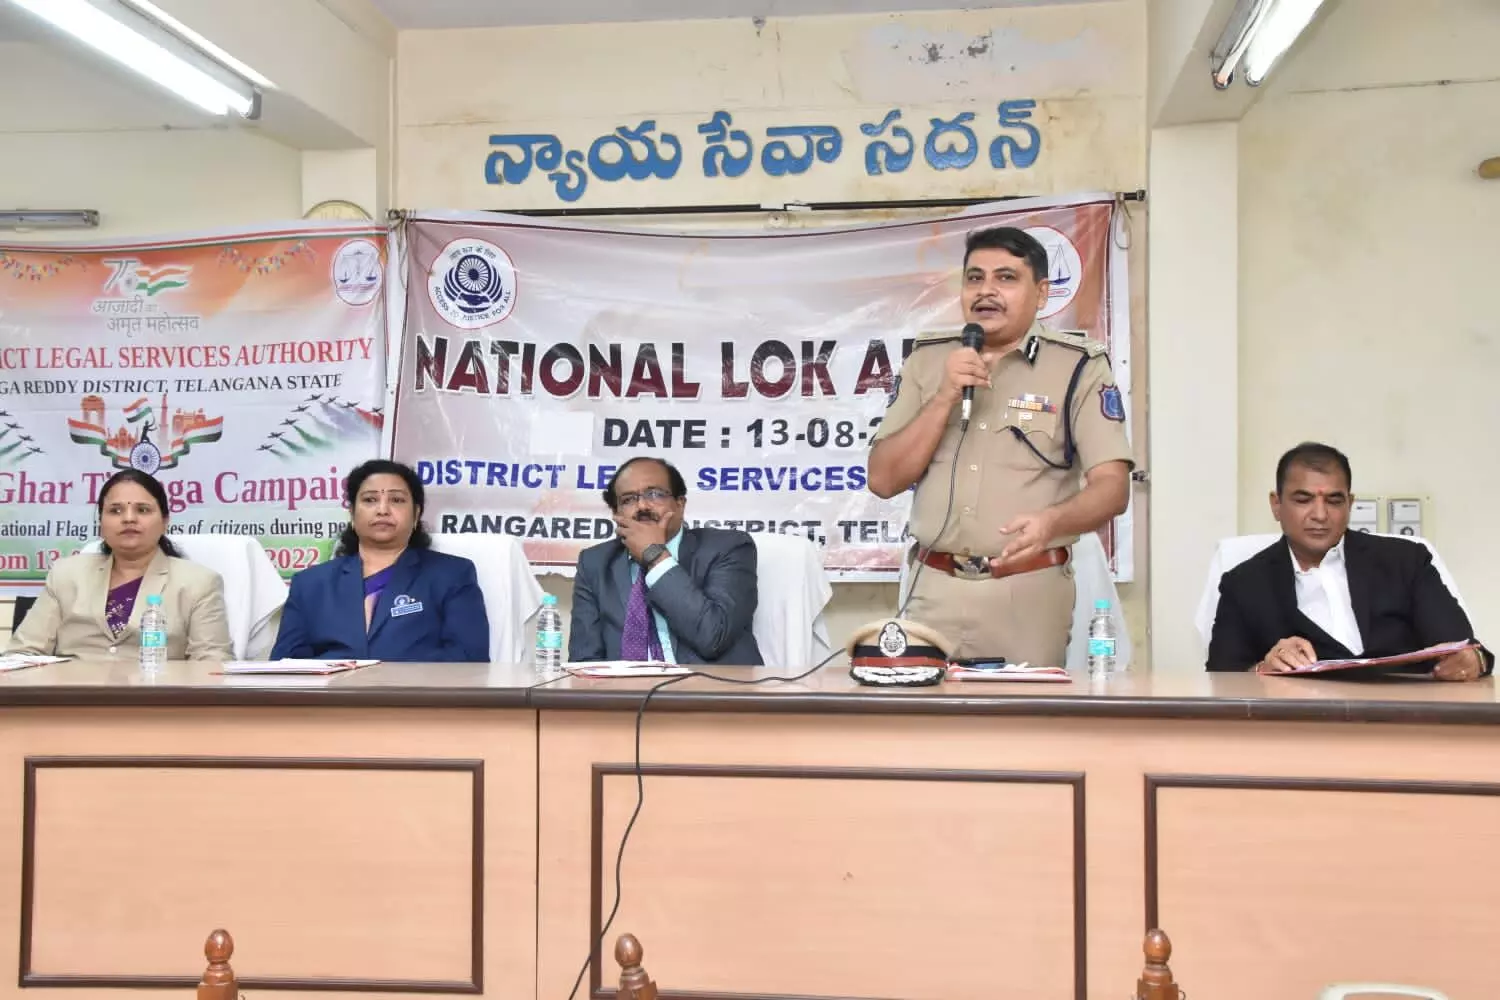 Rachakonda CP asks people to use Lok Adalat to resolve cases out of court